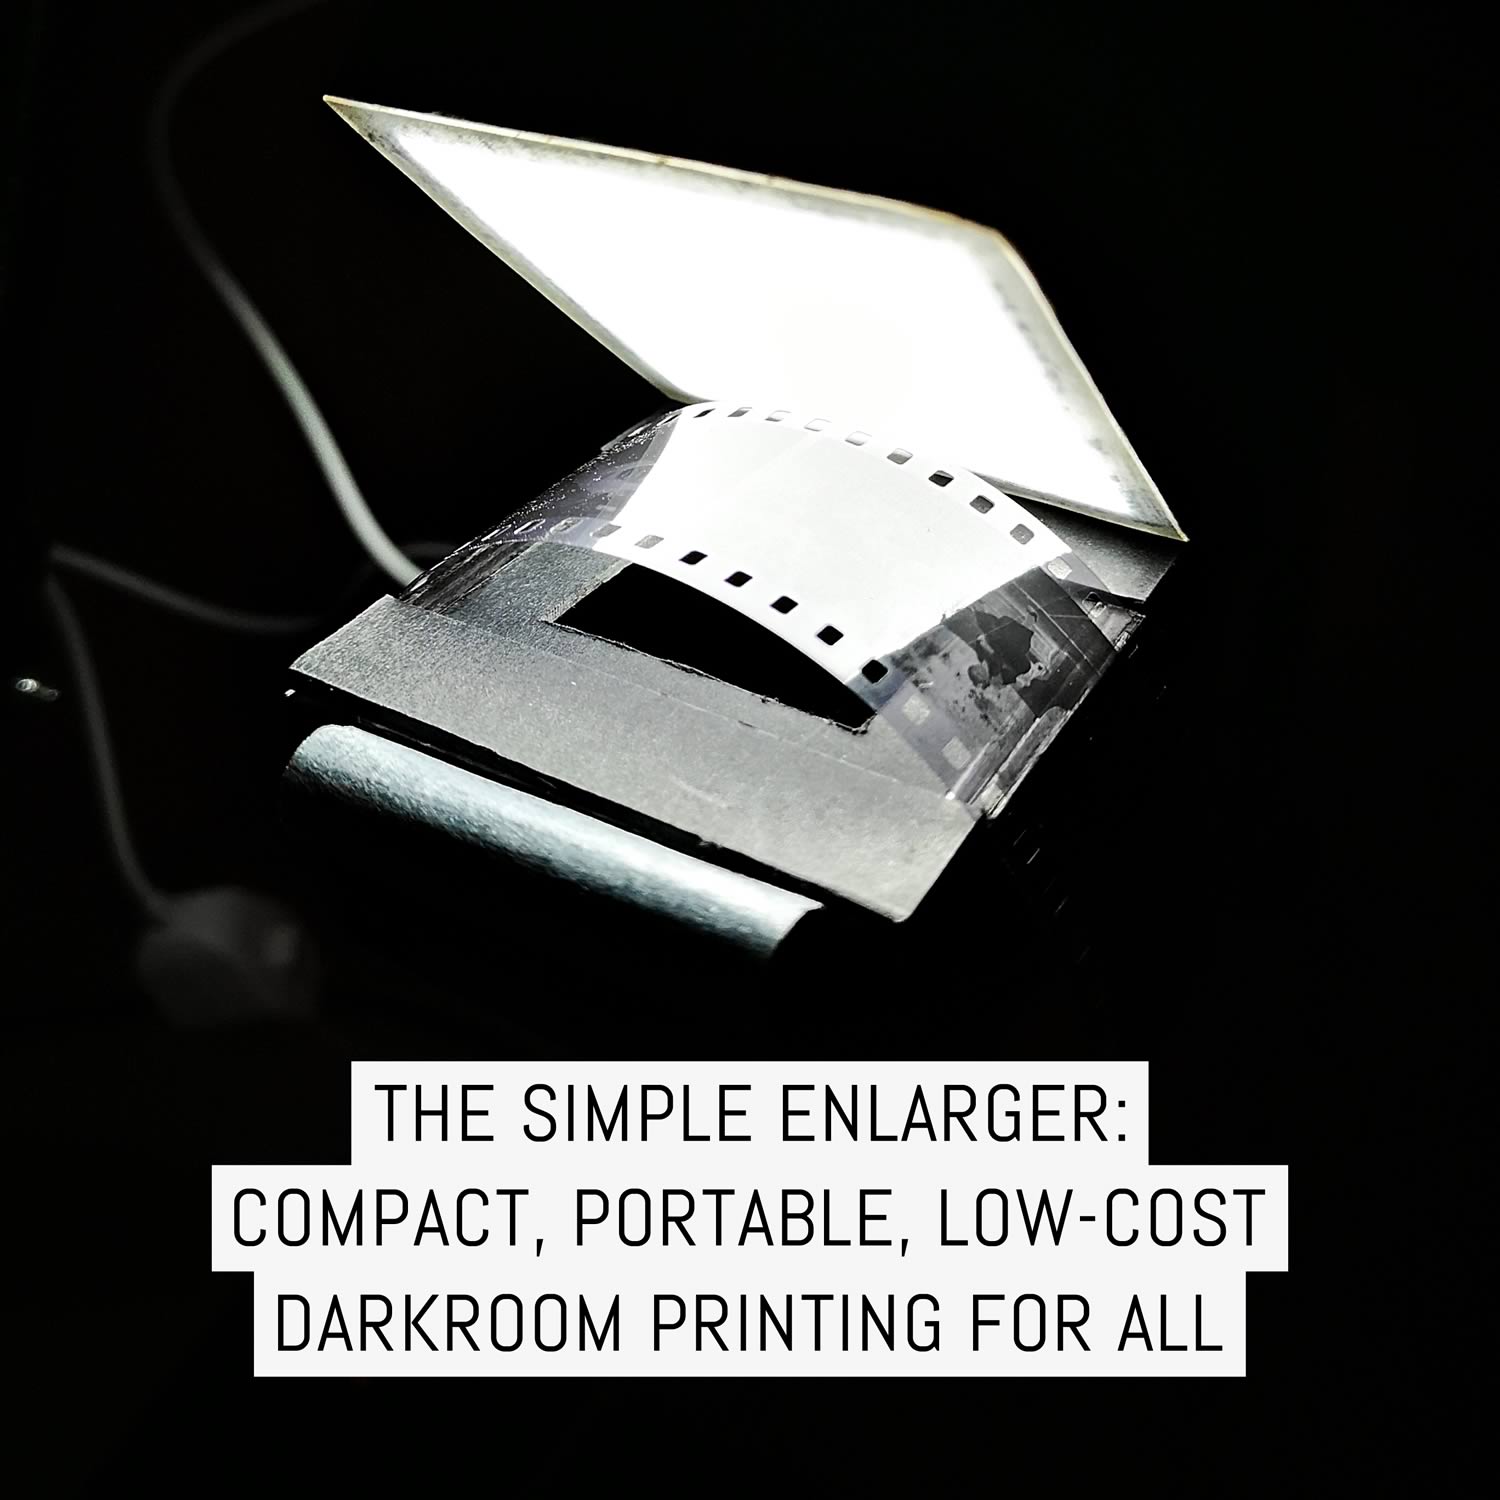 The Simple Enlarger: compact, portable, low-cost darkroom printing for all